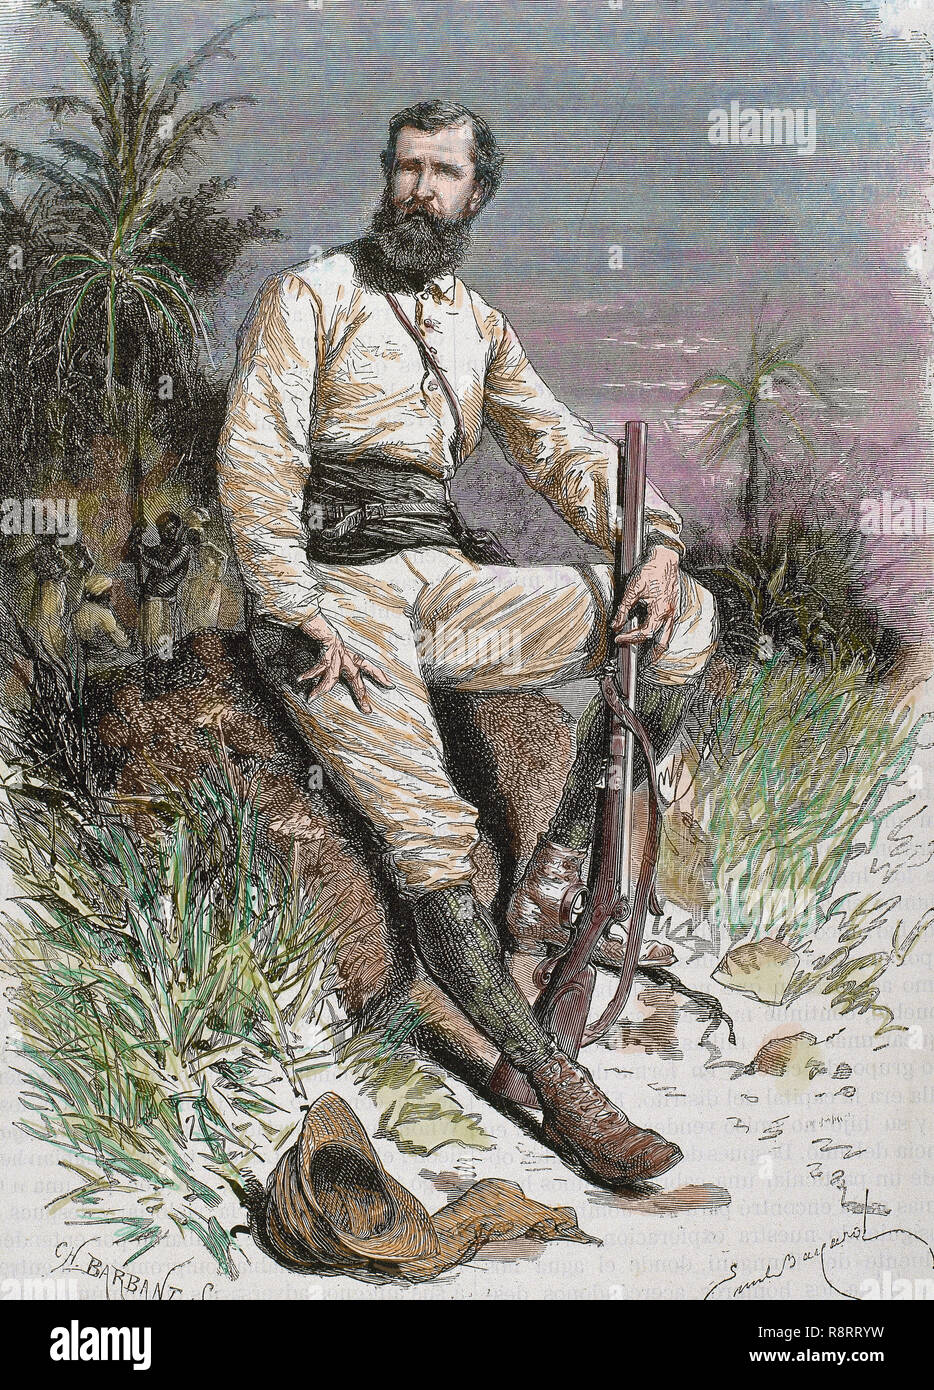 Cameron, Verney Lovett (1844-1894). British traveler and explorer. Engraving by Barbant. Colored. Stock Photo